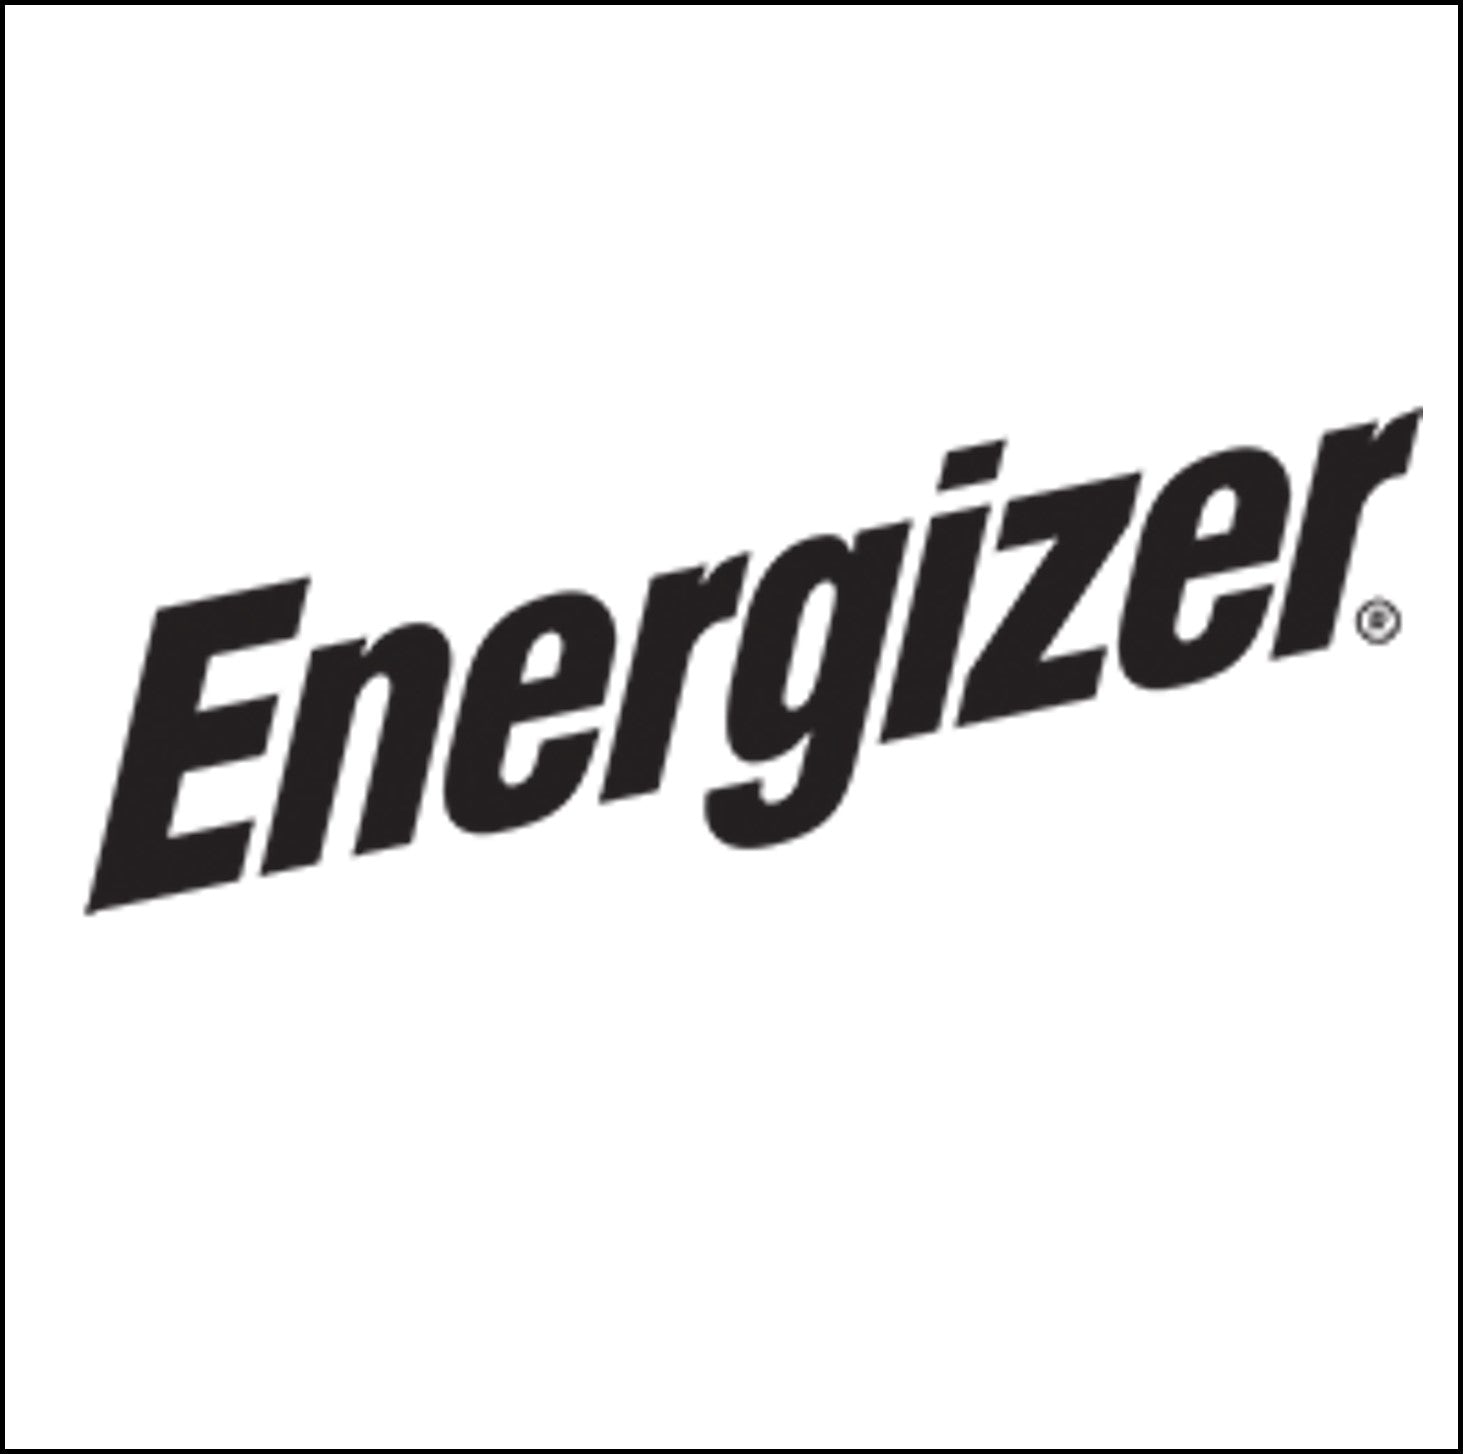 Energizer,-a-global-leader-in-battery-technology-brands-image-of-their-logo-or-trademark